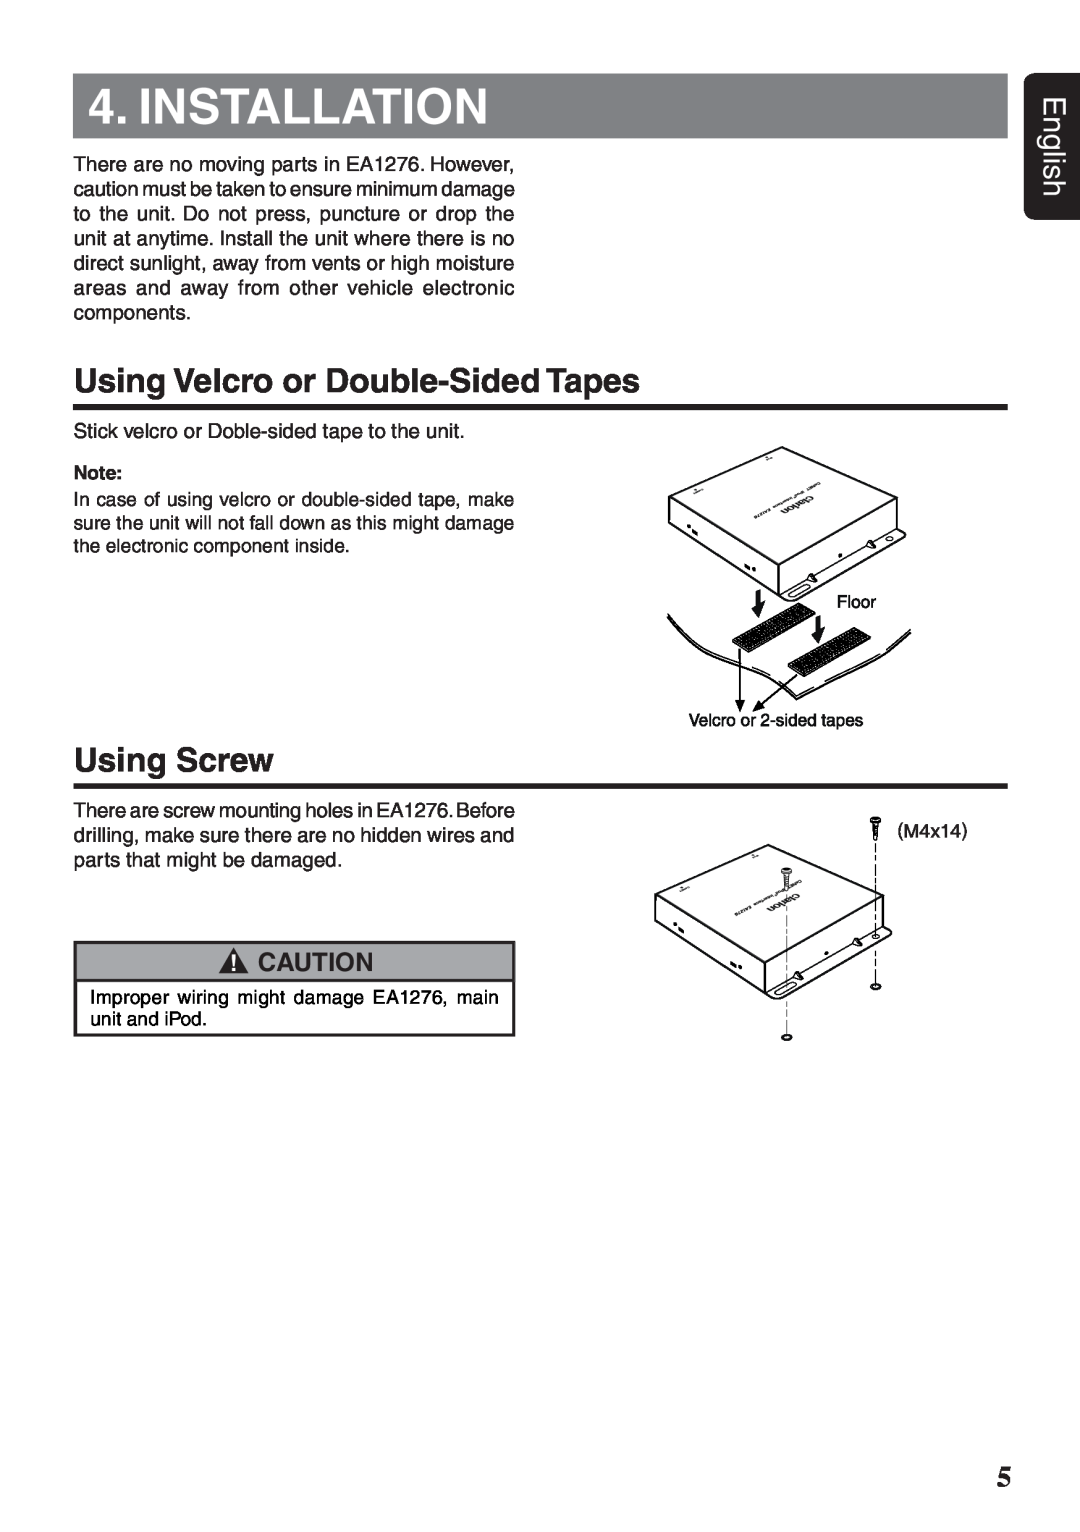 Clarion EA1276 owner manual Installation, Using Velcro or Double-SidedTapes, Using Screw, English 